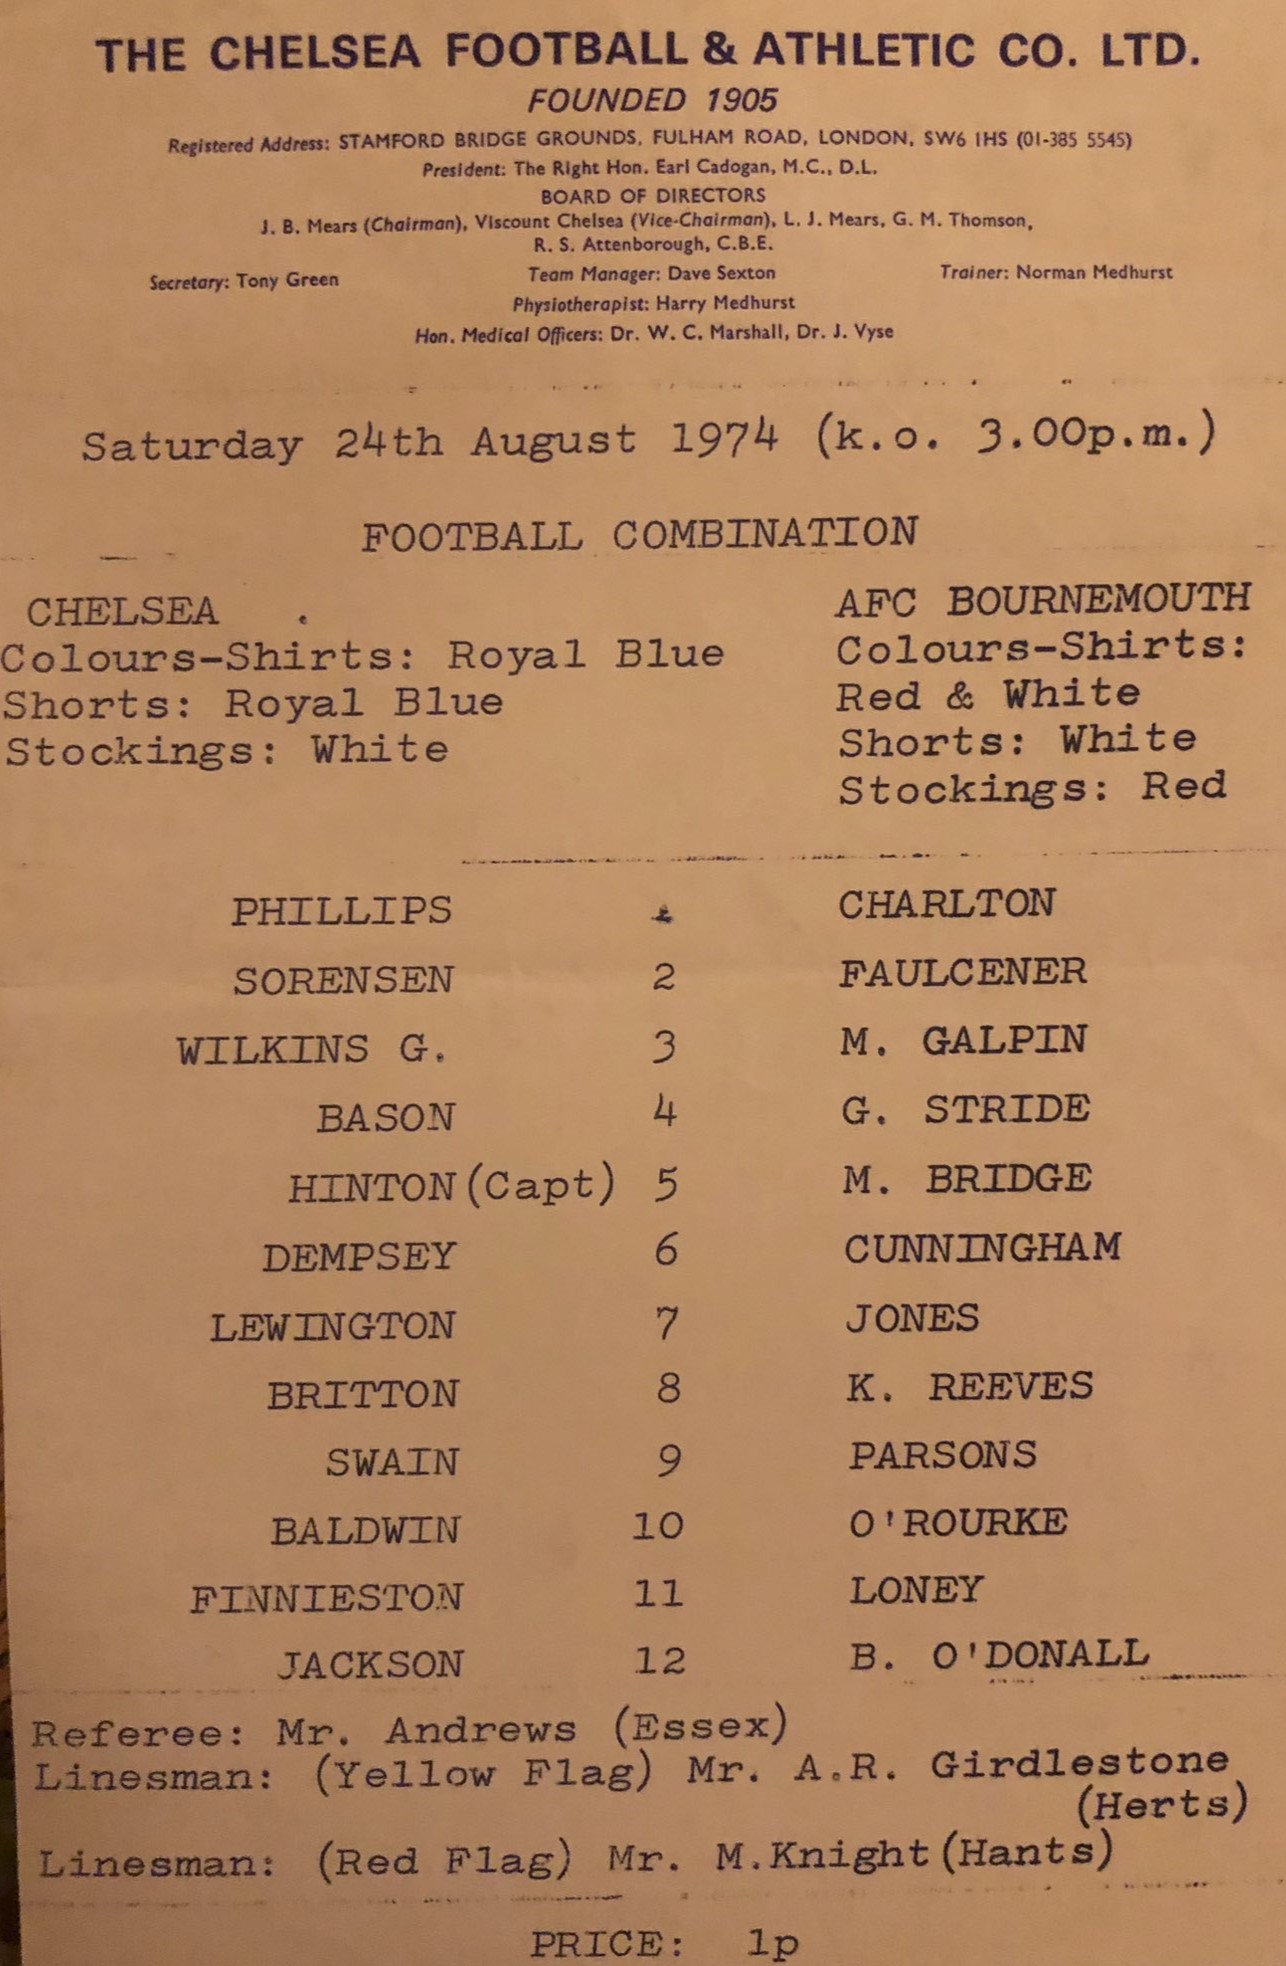 programme cover for Chelsea v AFC Bournemouth, Saturday, 24th Aug 1974